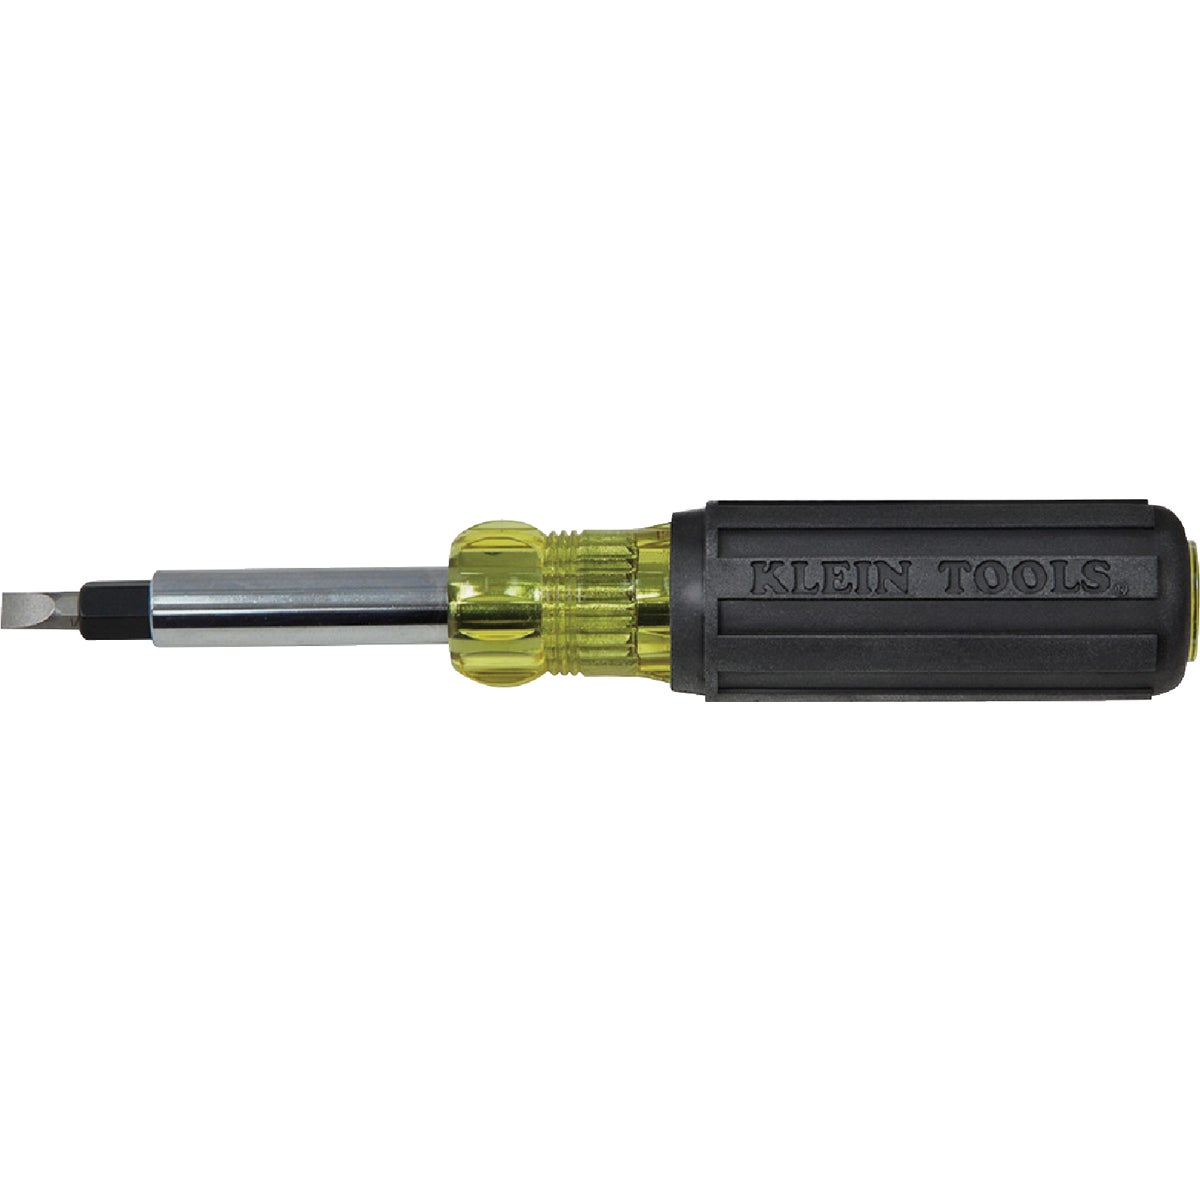 Item 335967, 9-in-1 heavy-duty screwdriver/nutdriver offers superior torque for tough 